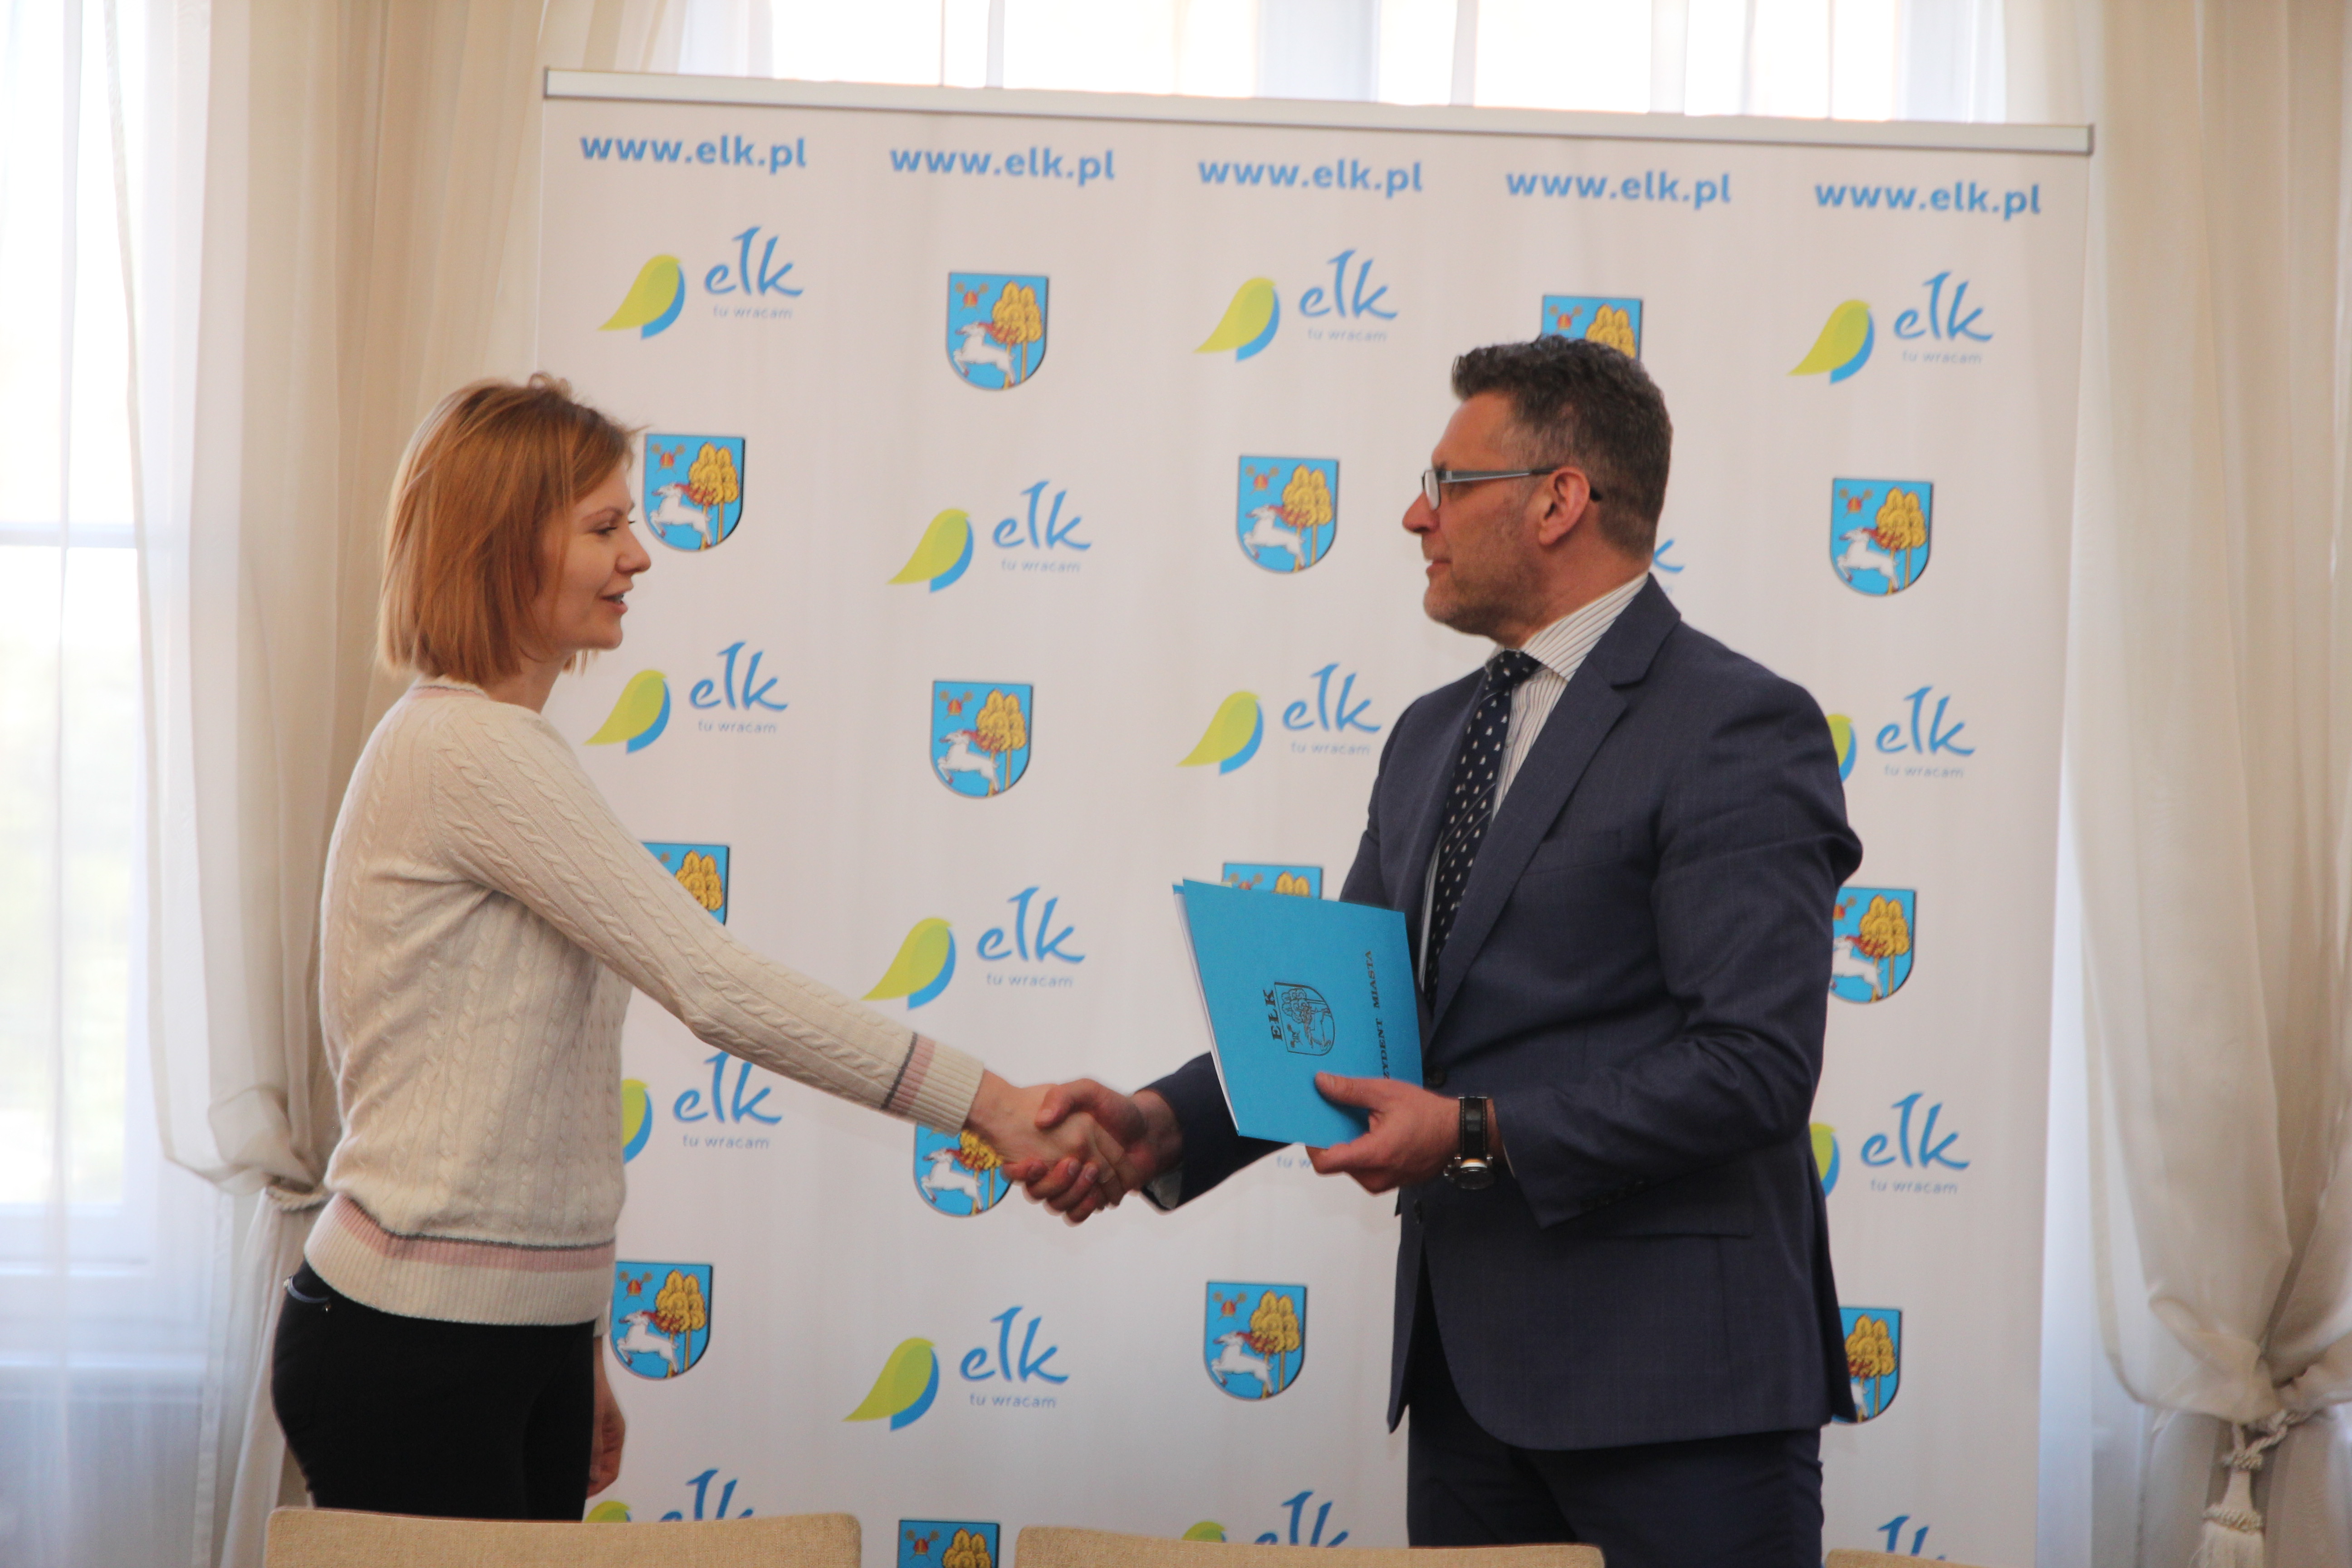 Another task assigned to the NGO of the year 2018 in ełk County